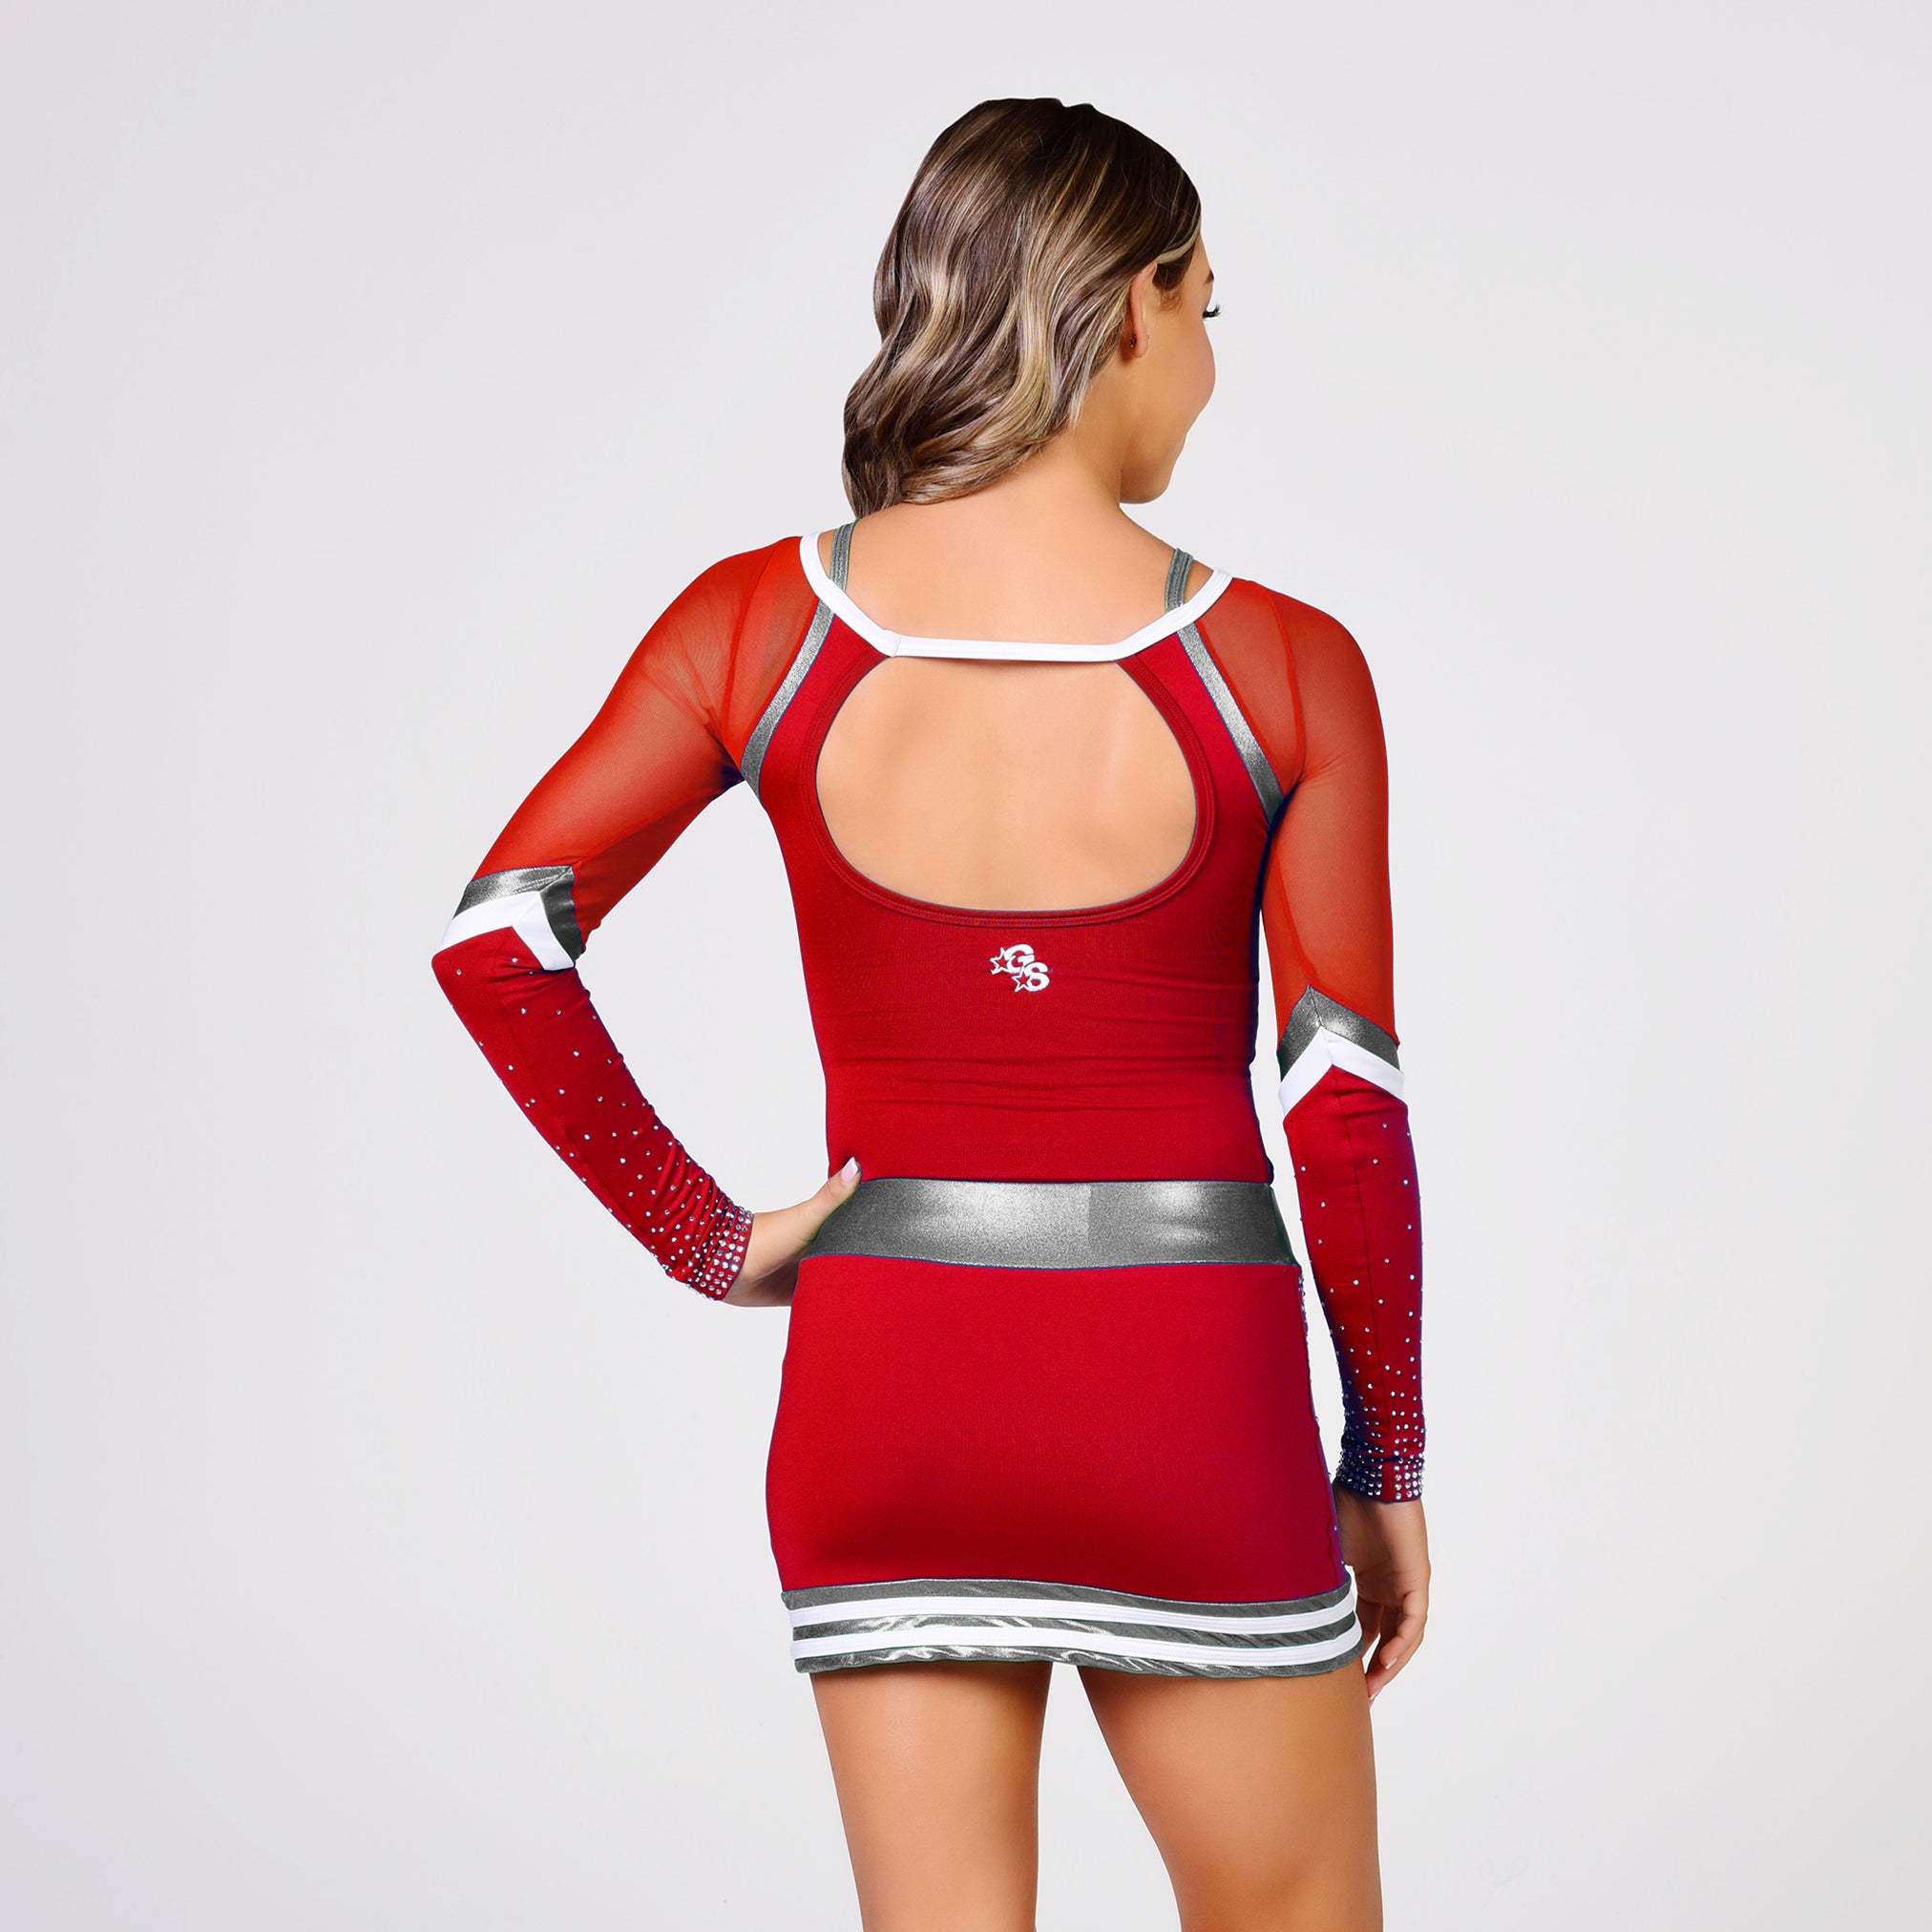 Journey Uniform with Mesh Sleeves - Red